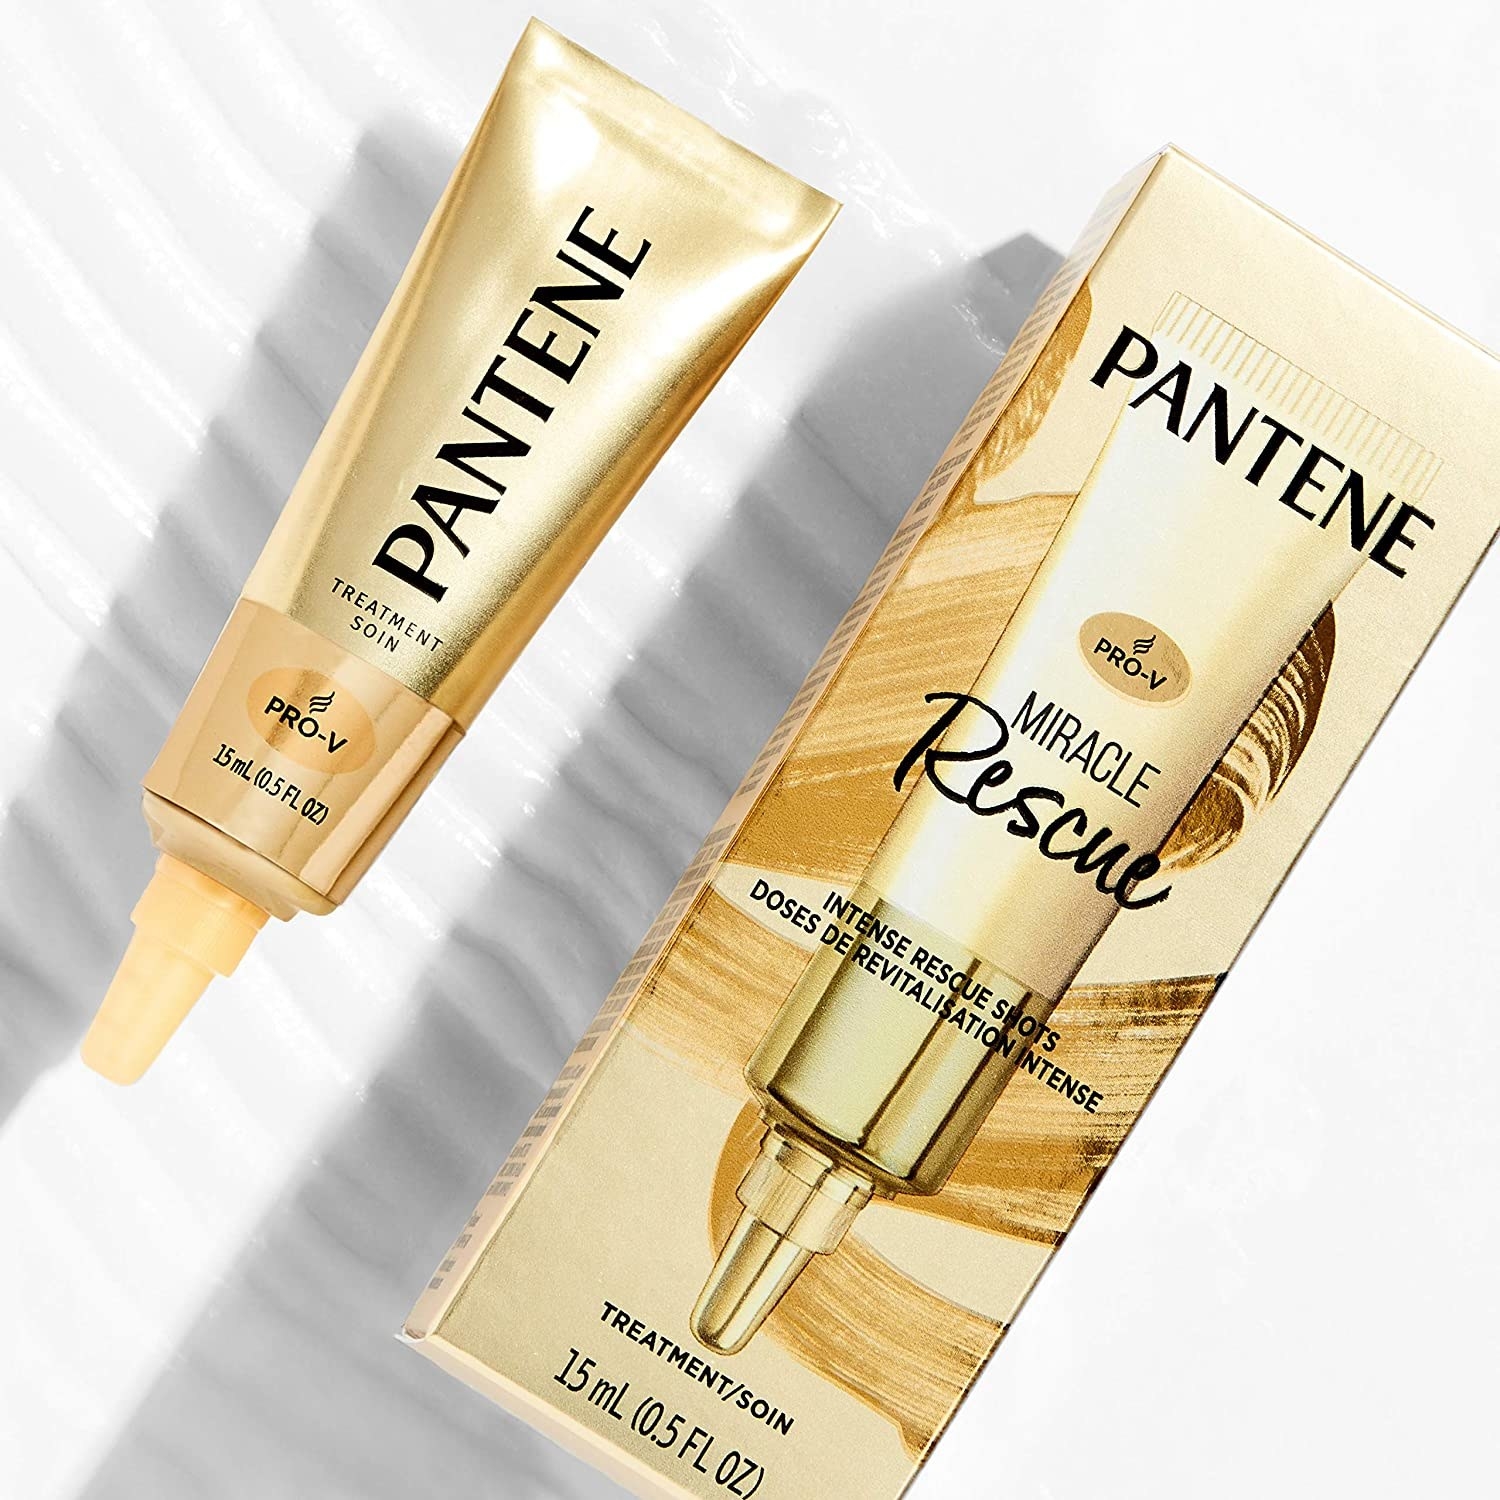 A box of a Pantene intensive Miracle Rescue treatment shot